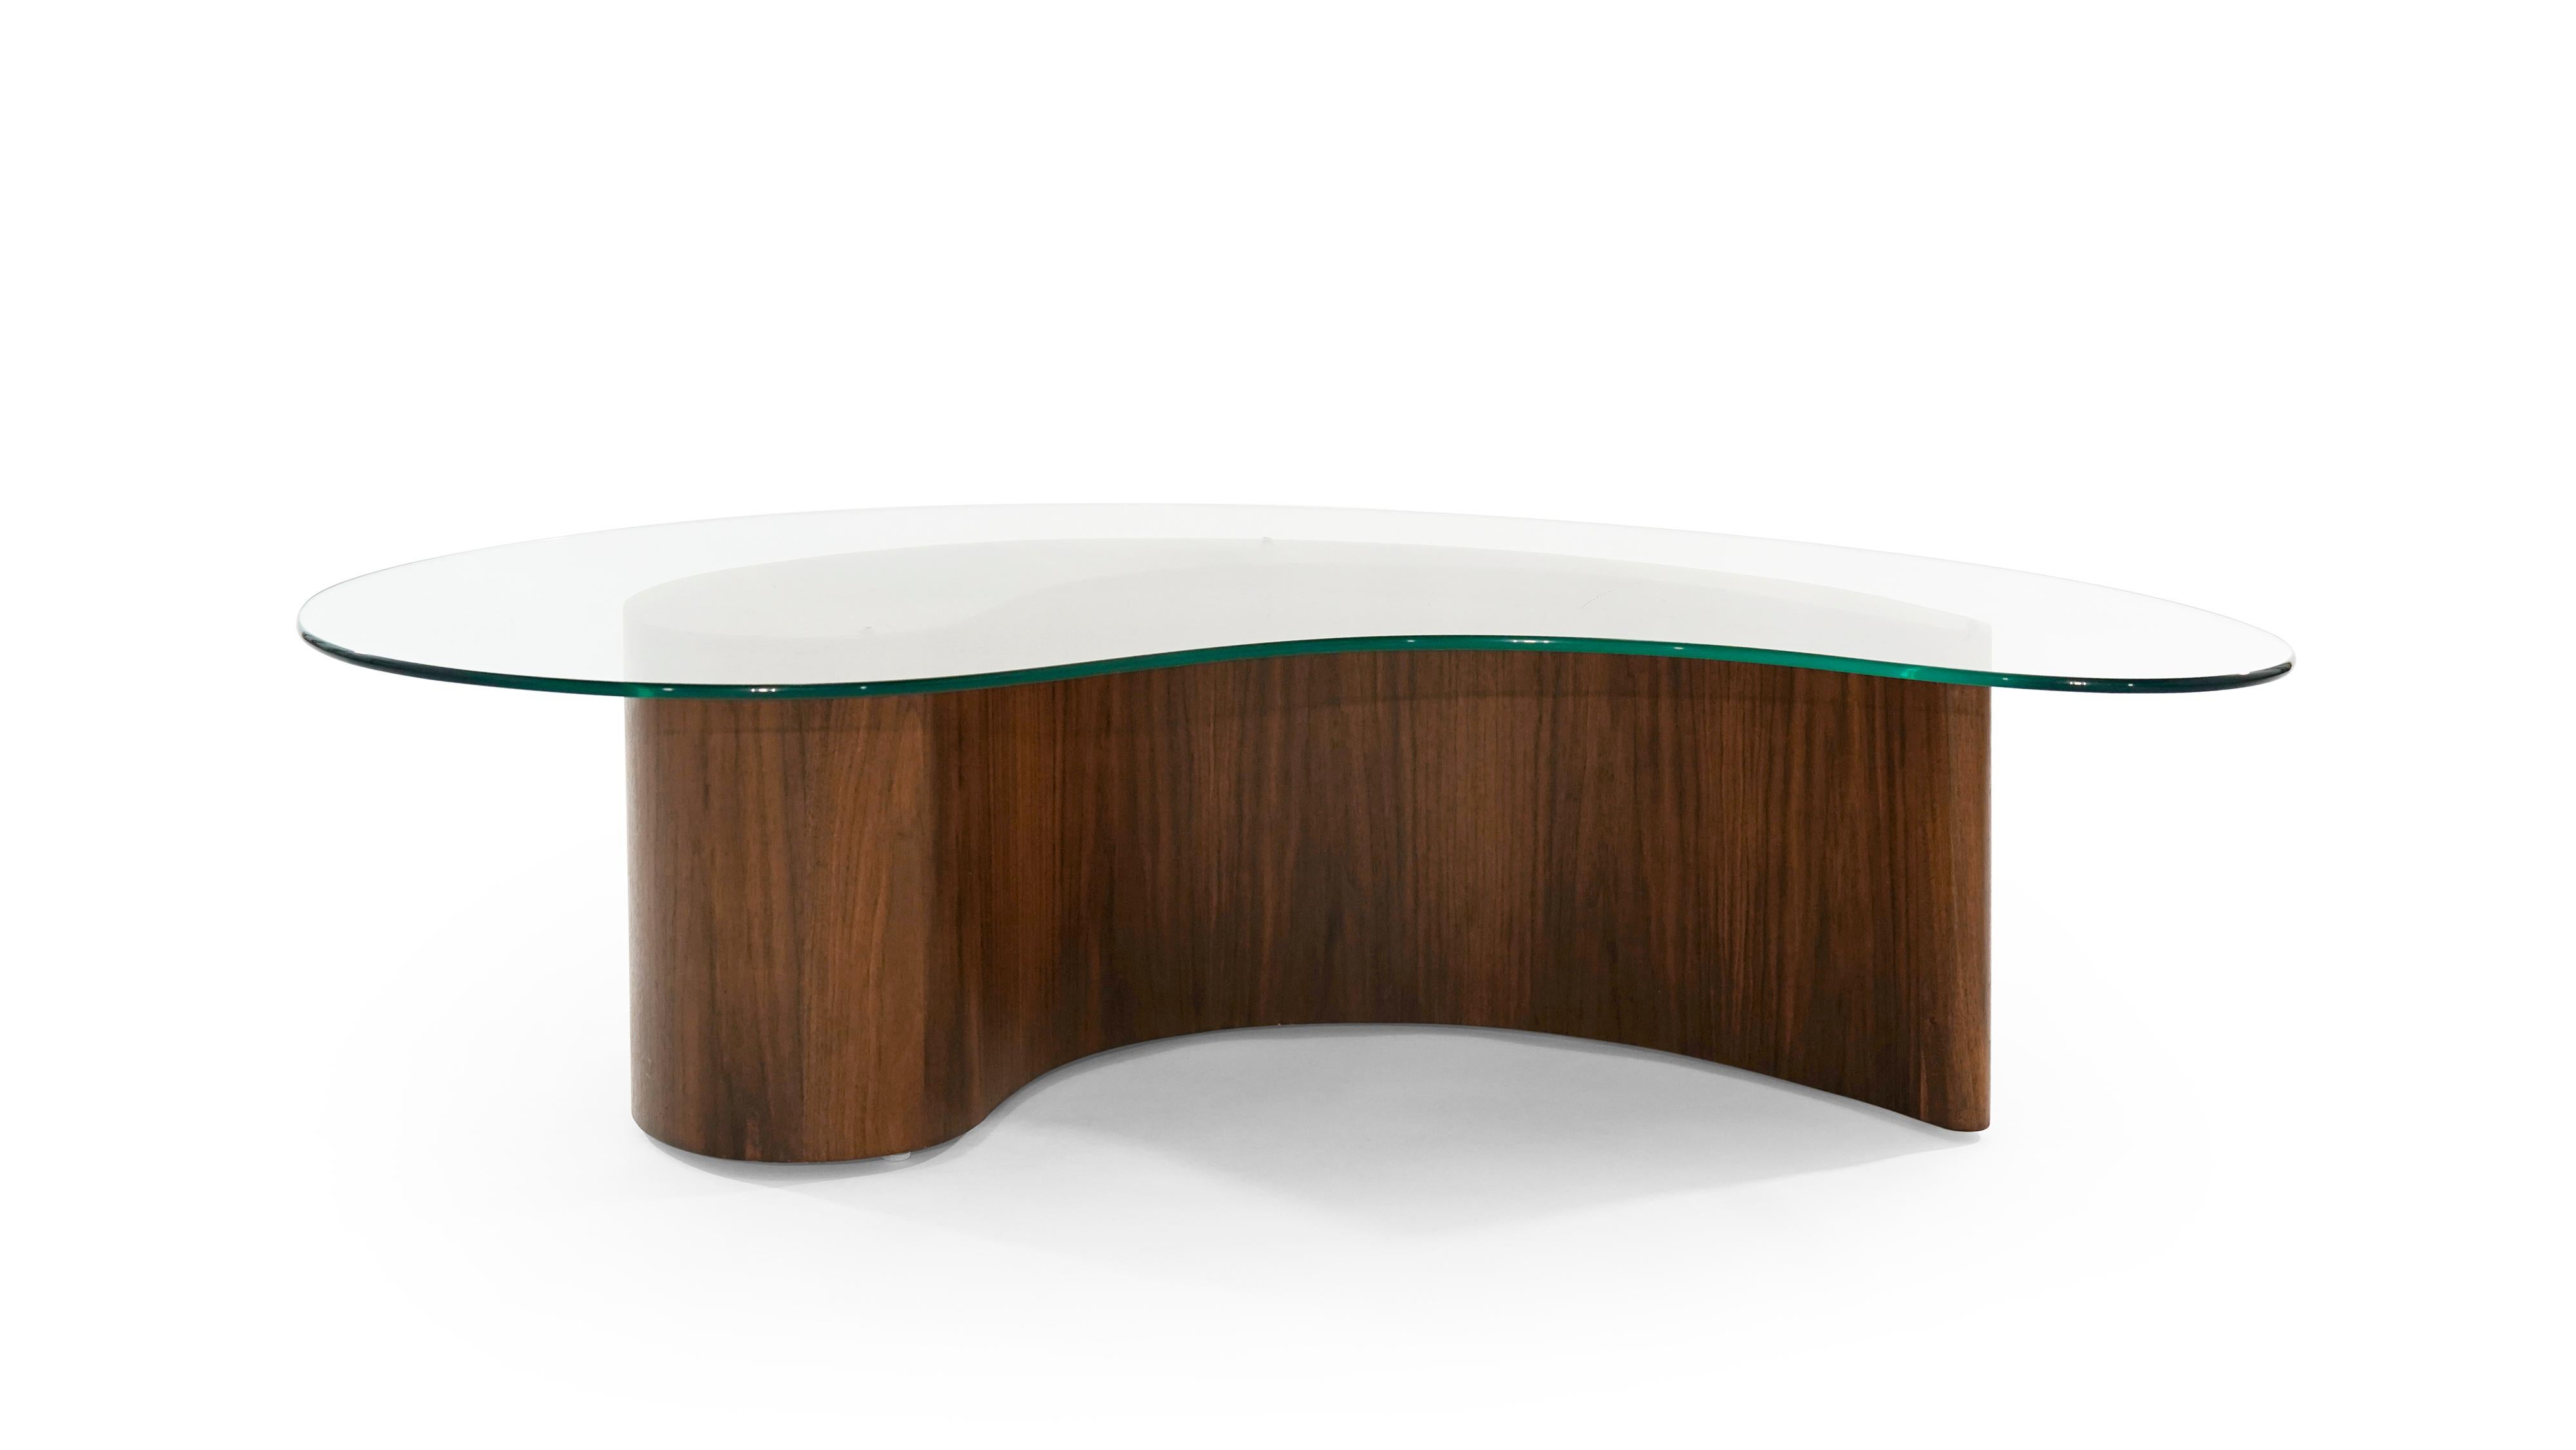 An apostrophe shaped coffee table attributed to Vladimir Kagan, circa 1950s. Walnut fully restored, new glass top.